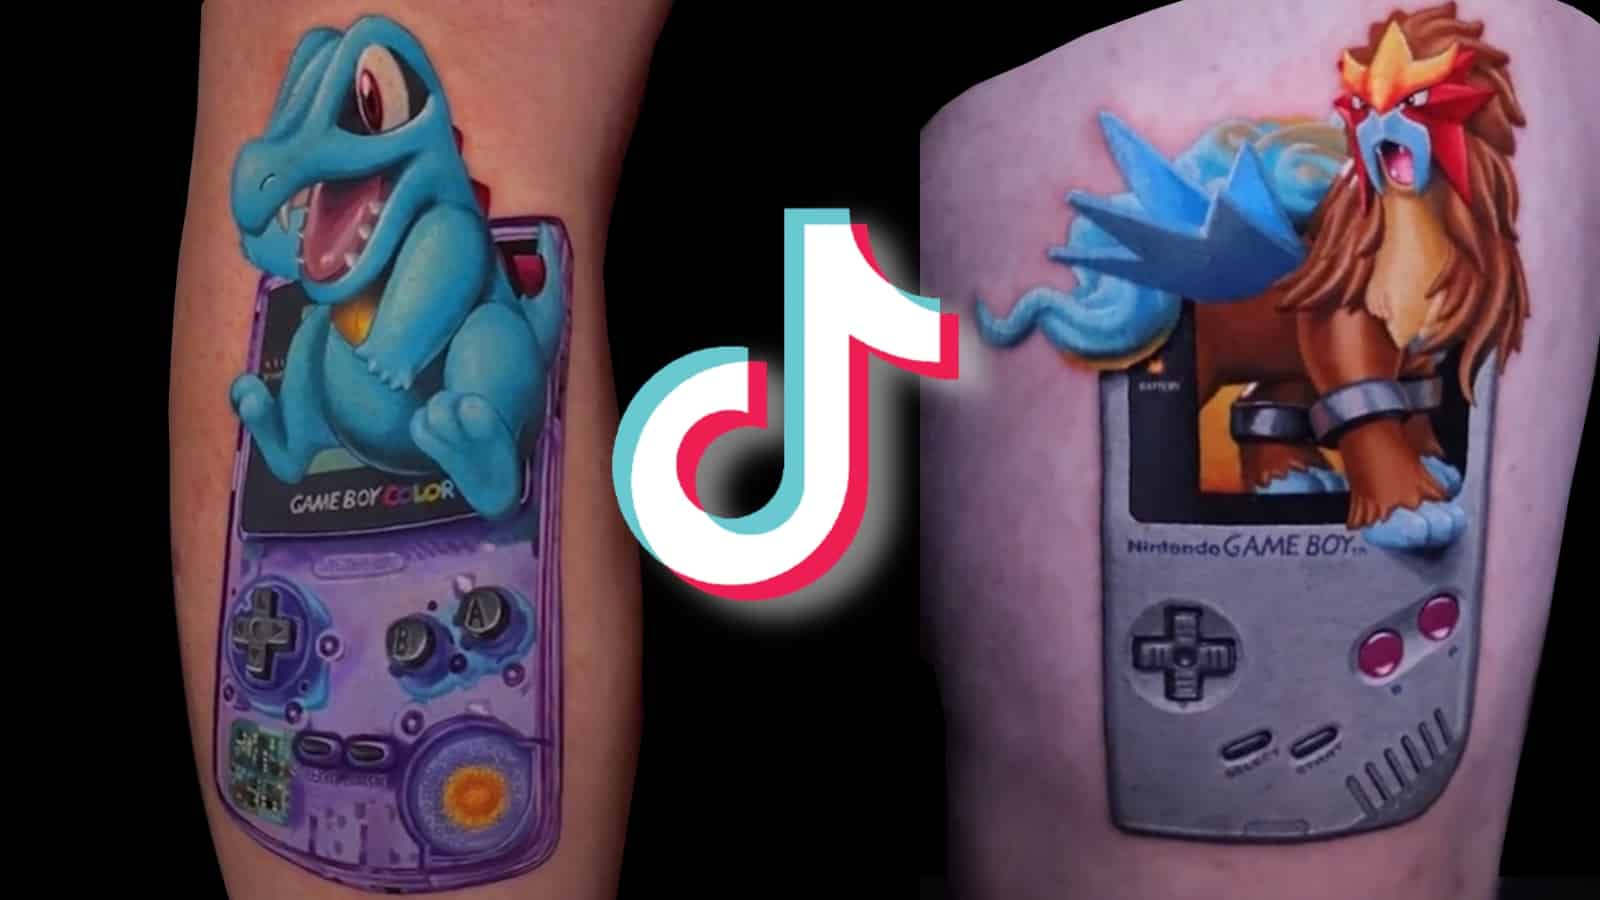 Tattoo uploaded by stevy95  GameBoy colour with Pikachu coming out of the  screen and charmander squirtle and bulbasaur surrounding it pokemon  Pikachu charmander squirtle bulbasaur GameBoy gameboycolour  legtattoo colourtattoo  Tattoodo